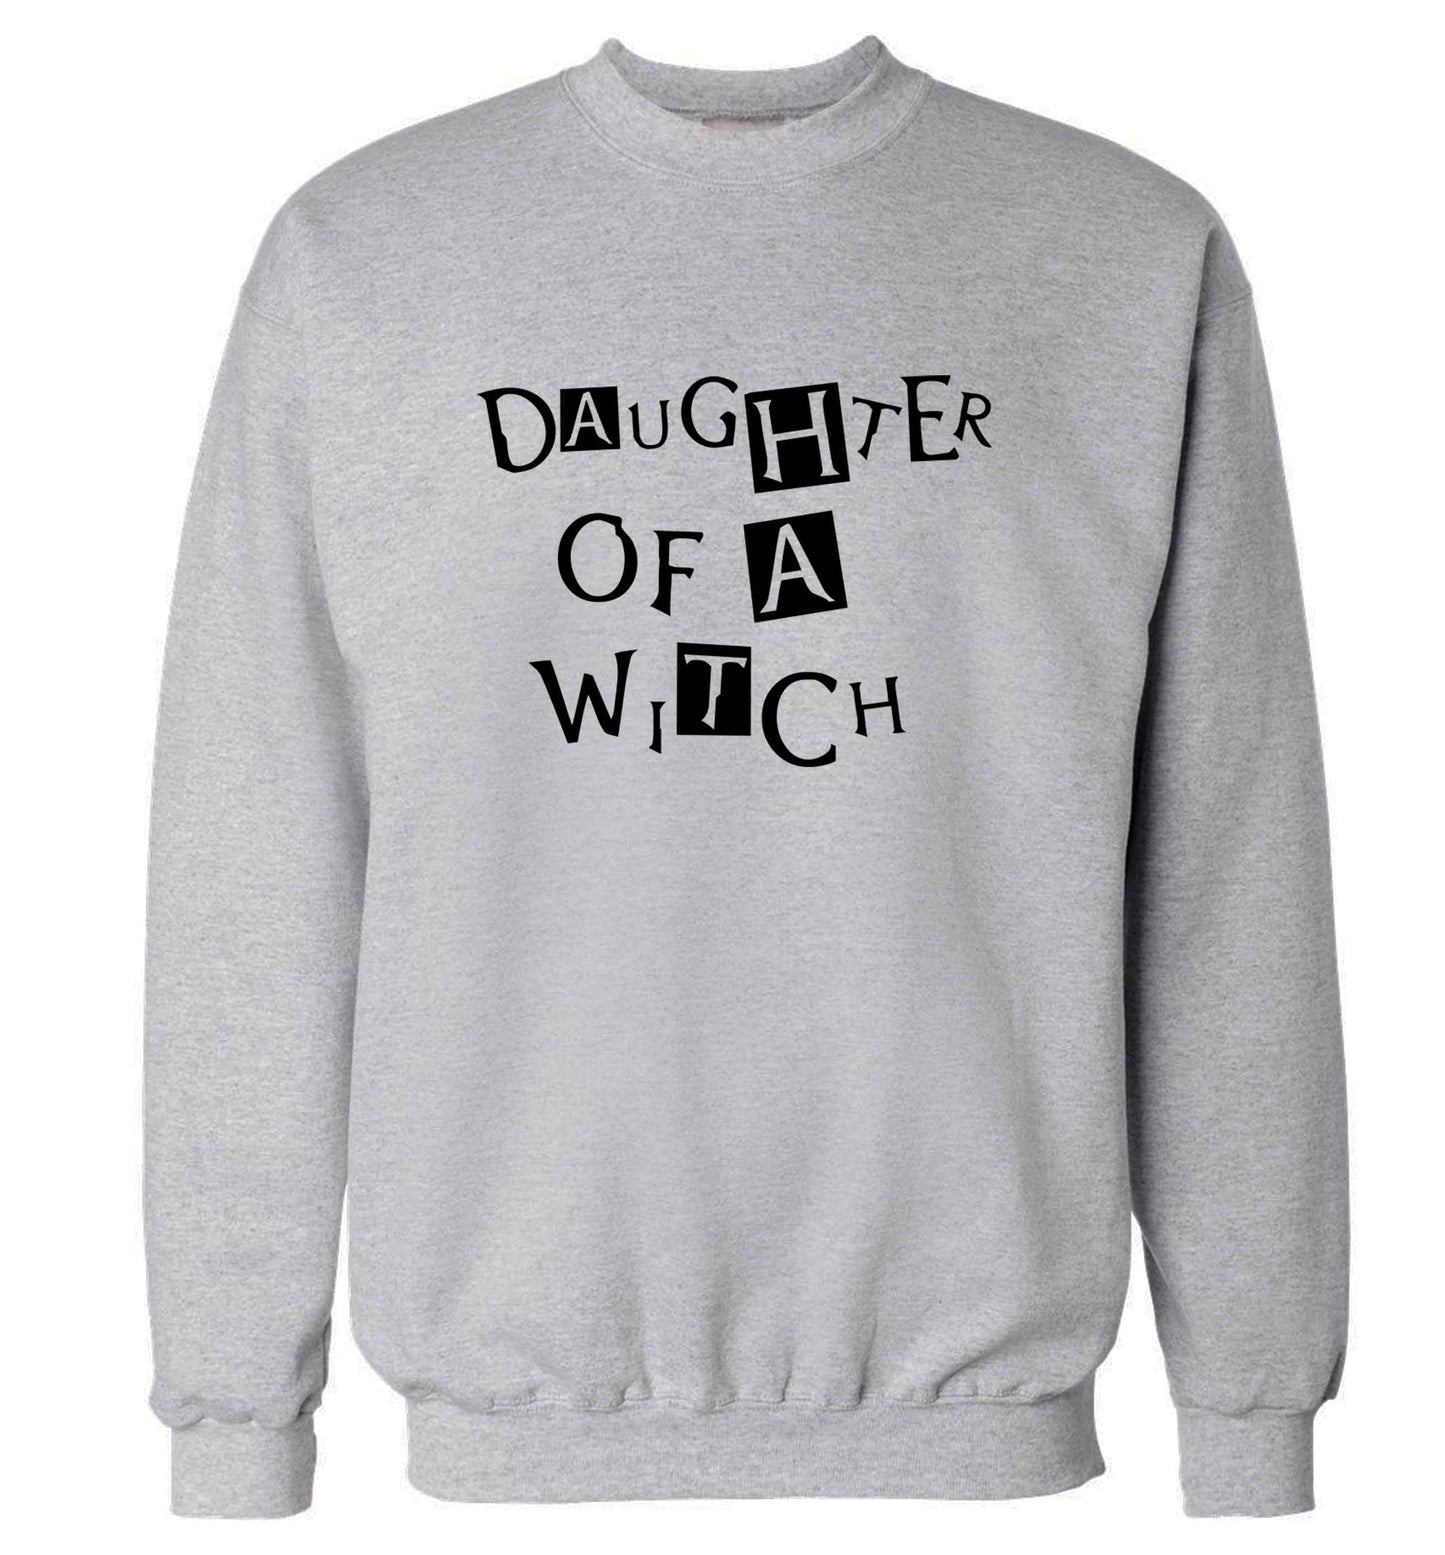 Daughter of a witch adult's unisex grey sweater 2XL